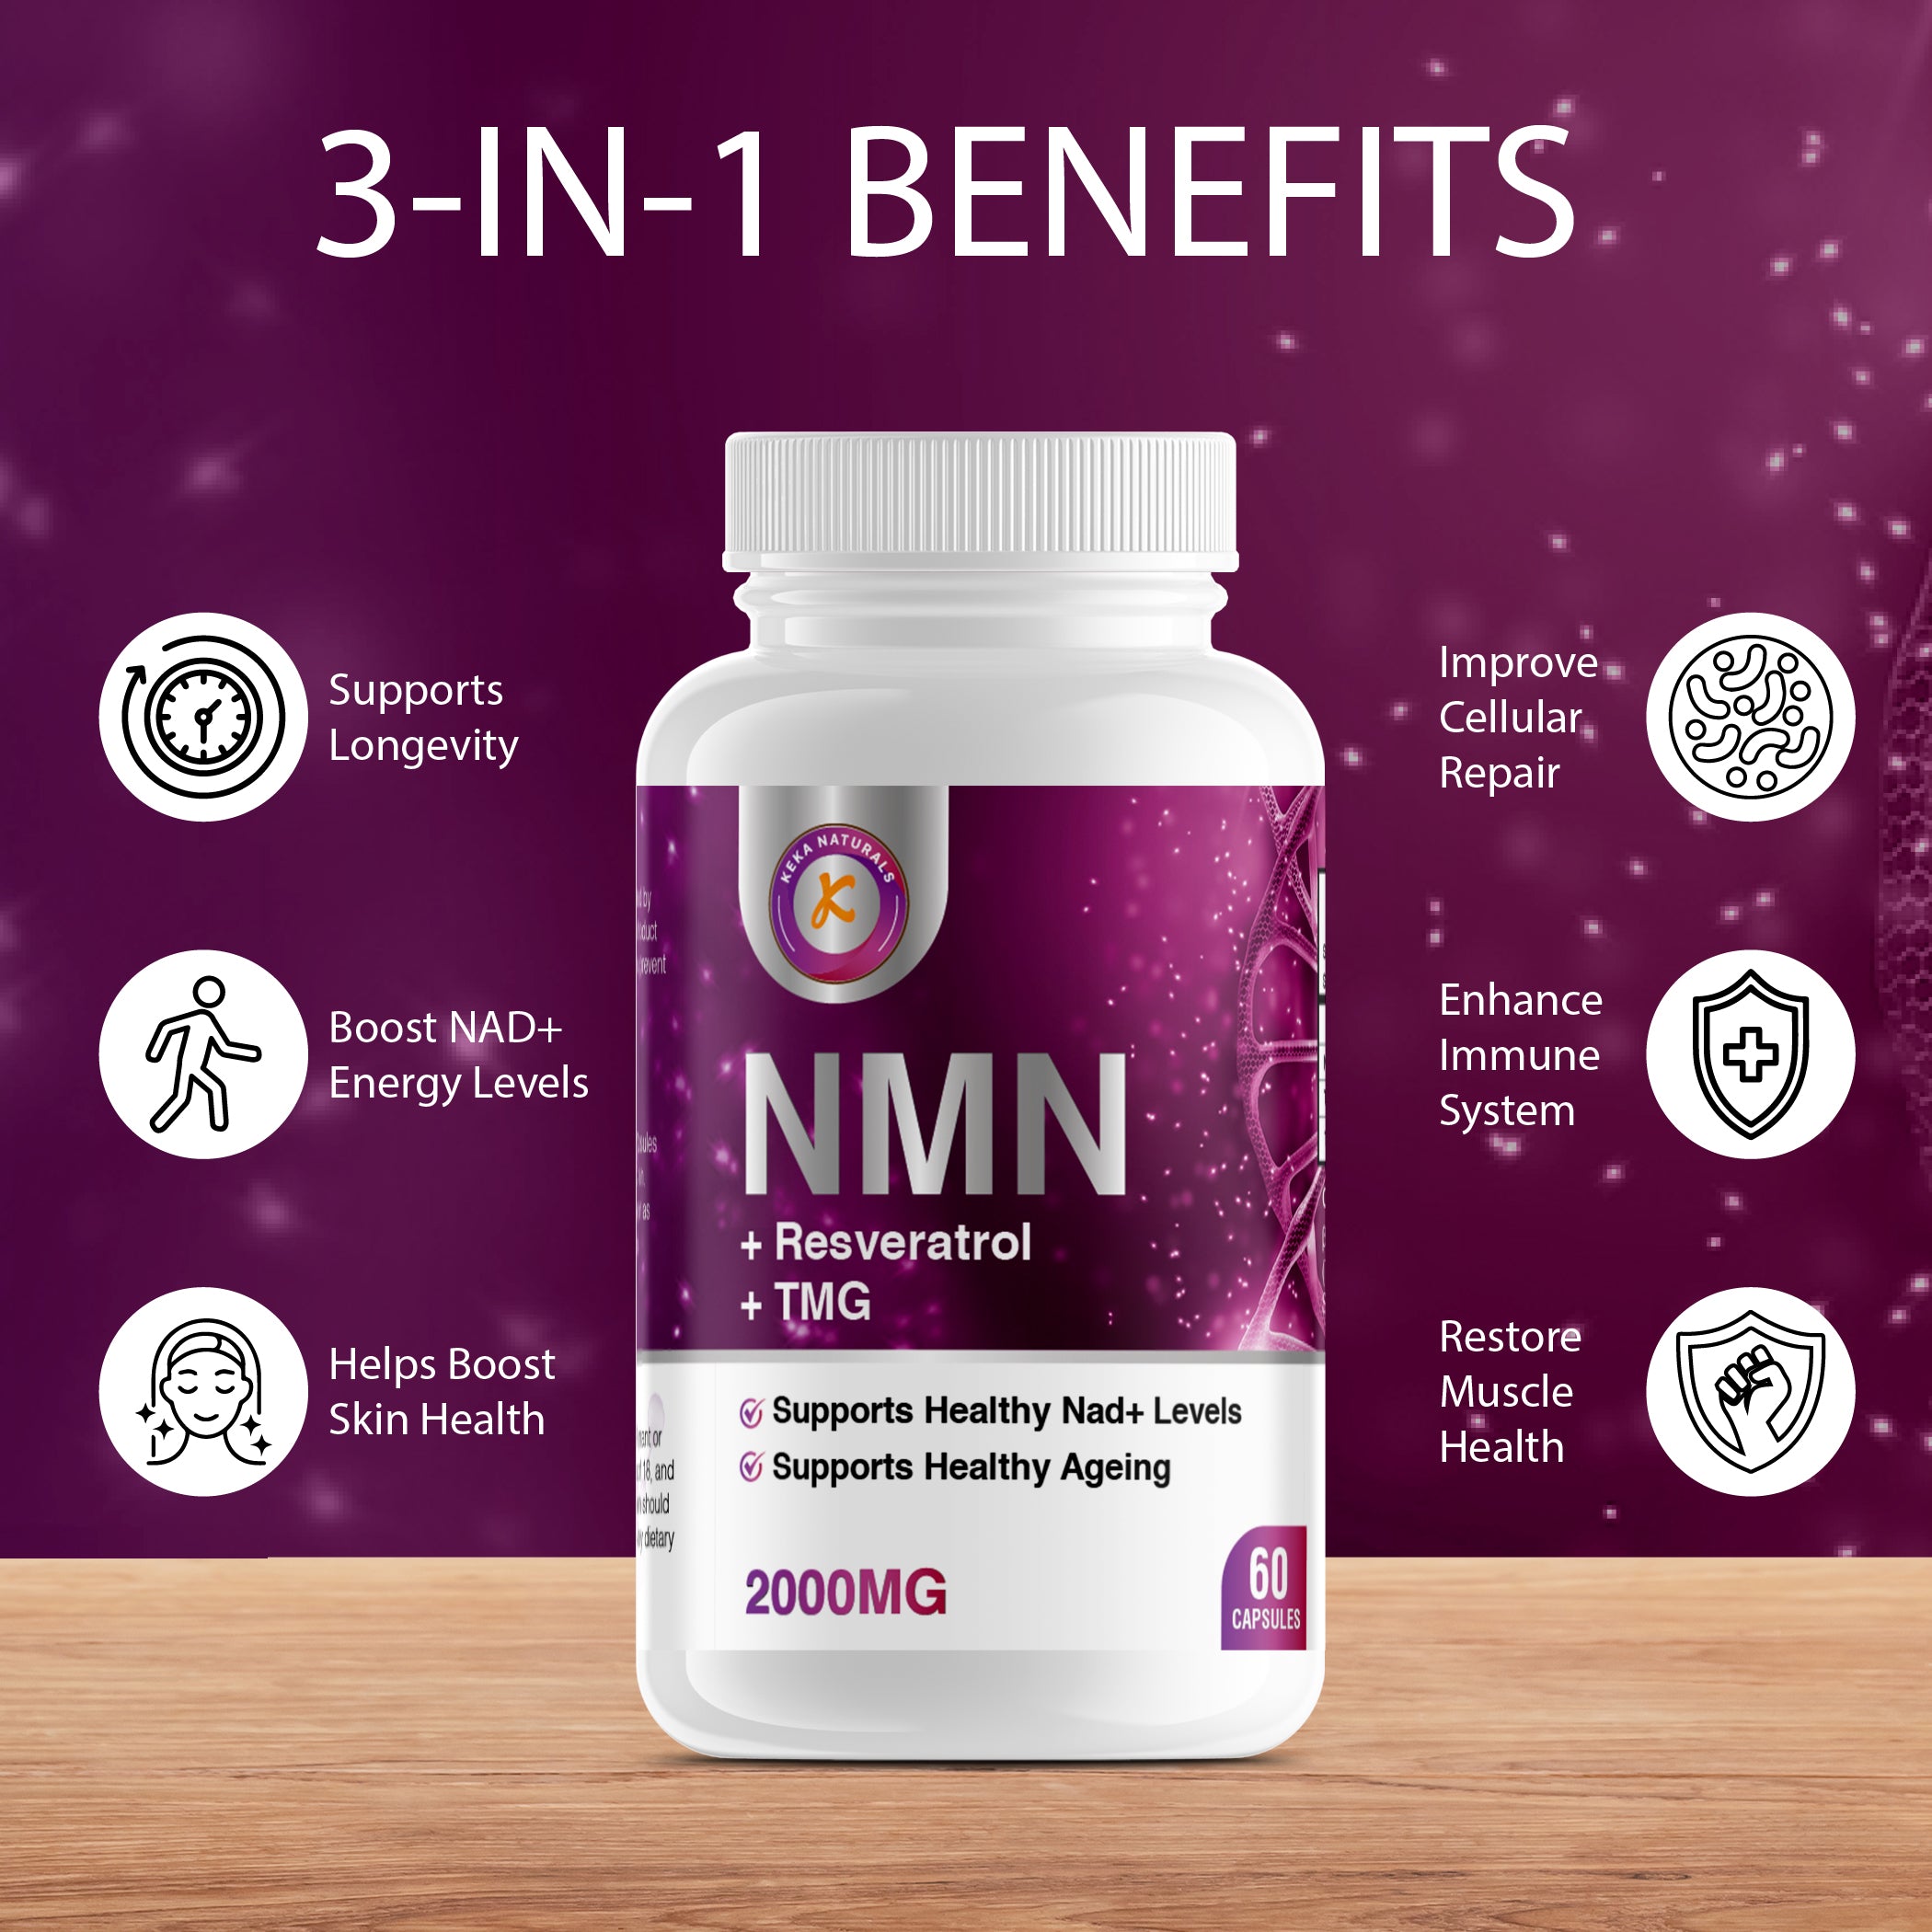 NMN Complex 2000mg with resveratrol and TMG benefits to support longevity improve cellular repair